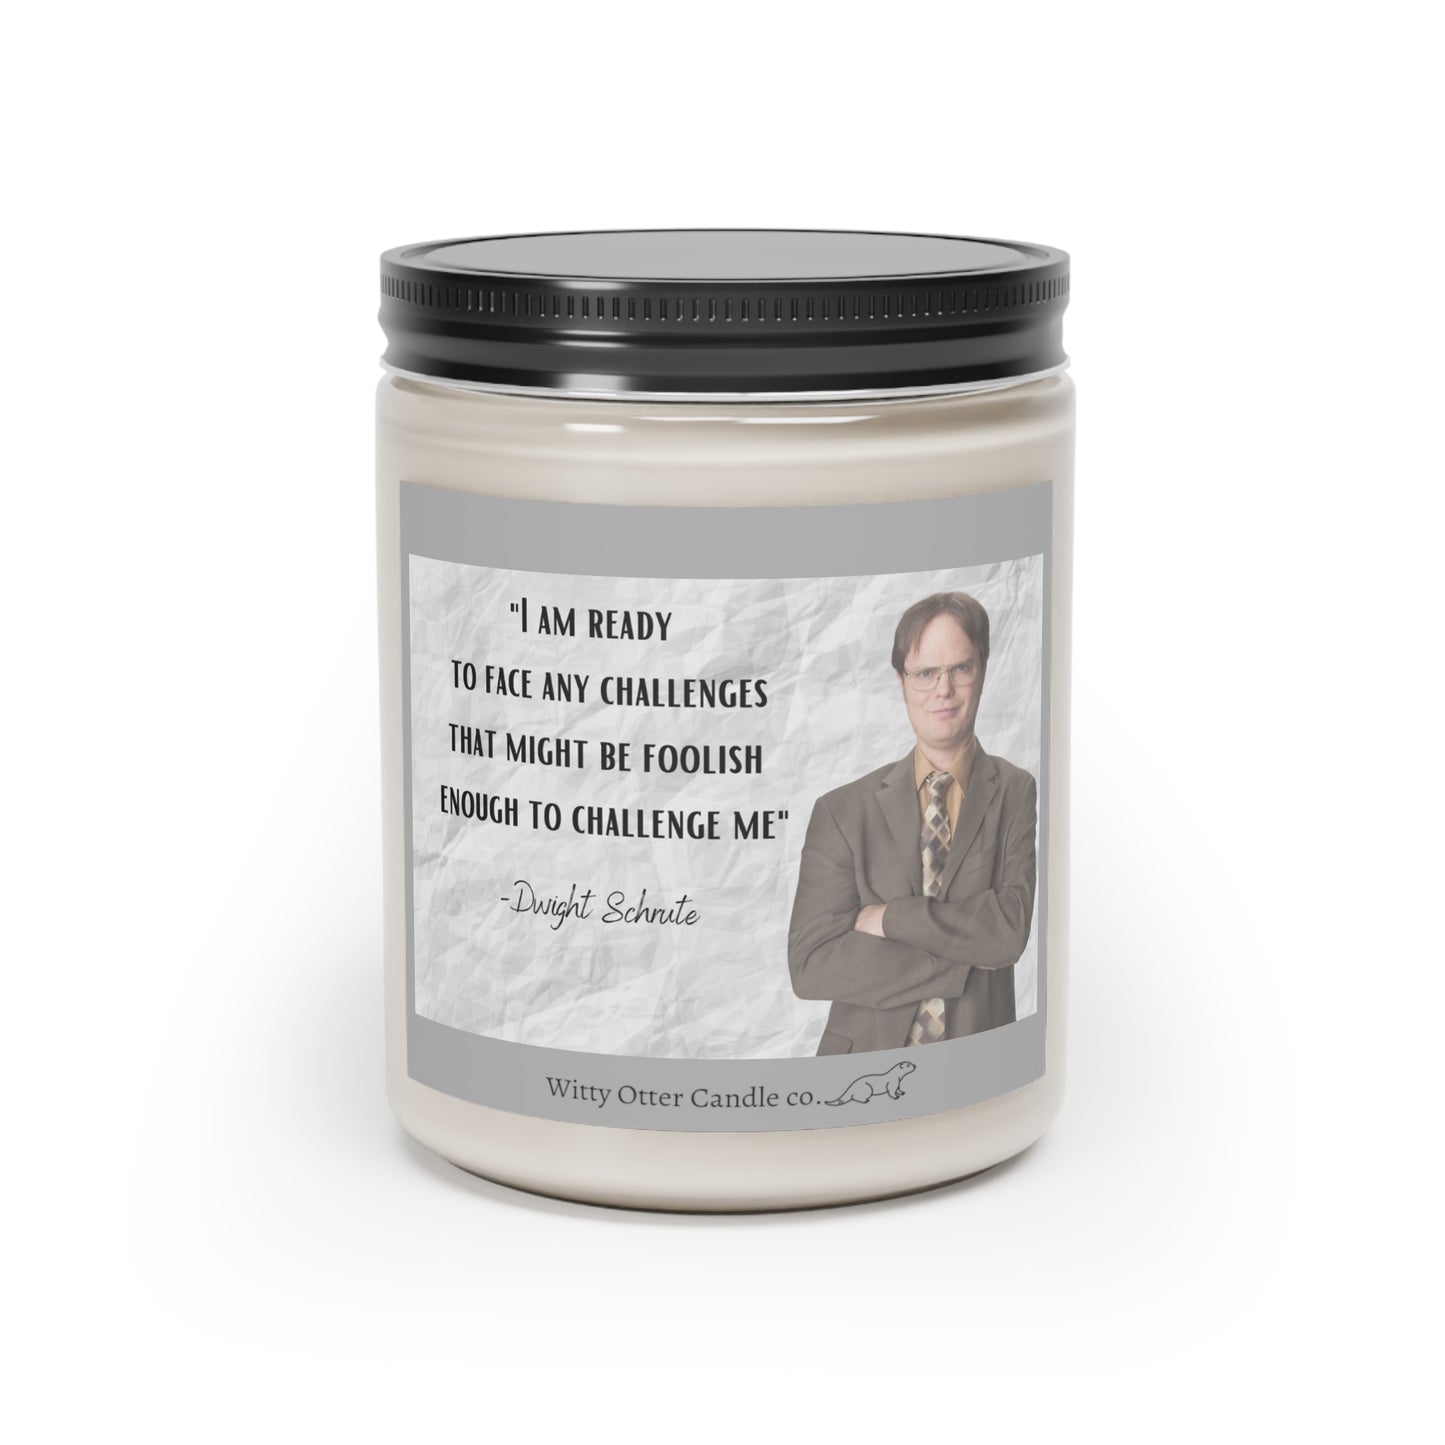 Dwight Schrute "Challenge" quote 9oz soy candle | the Office show candle